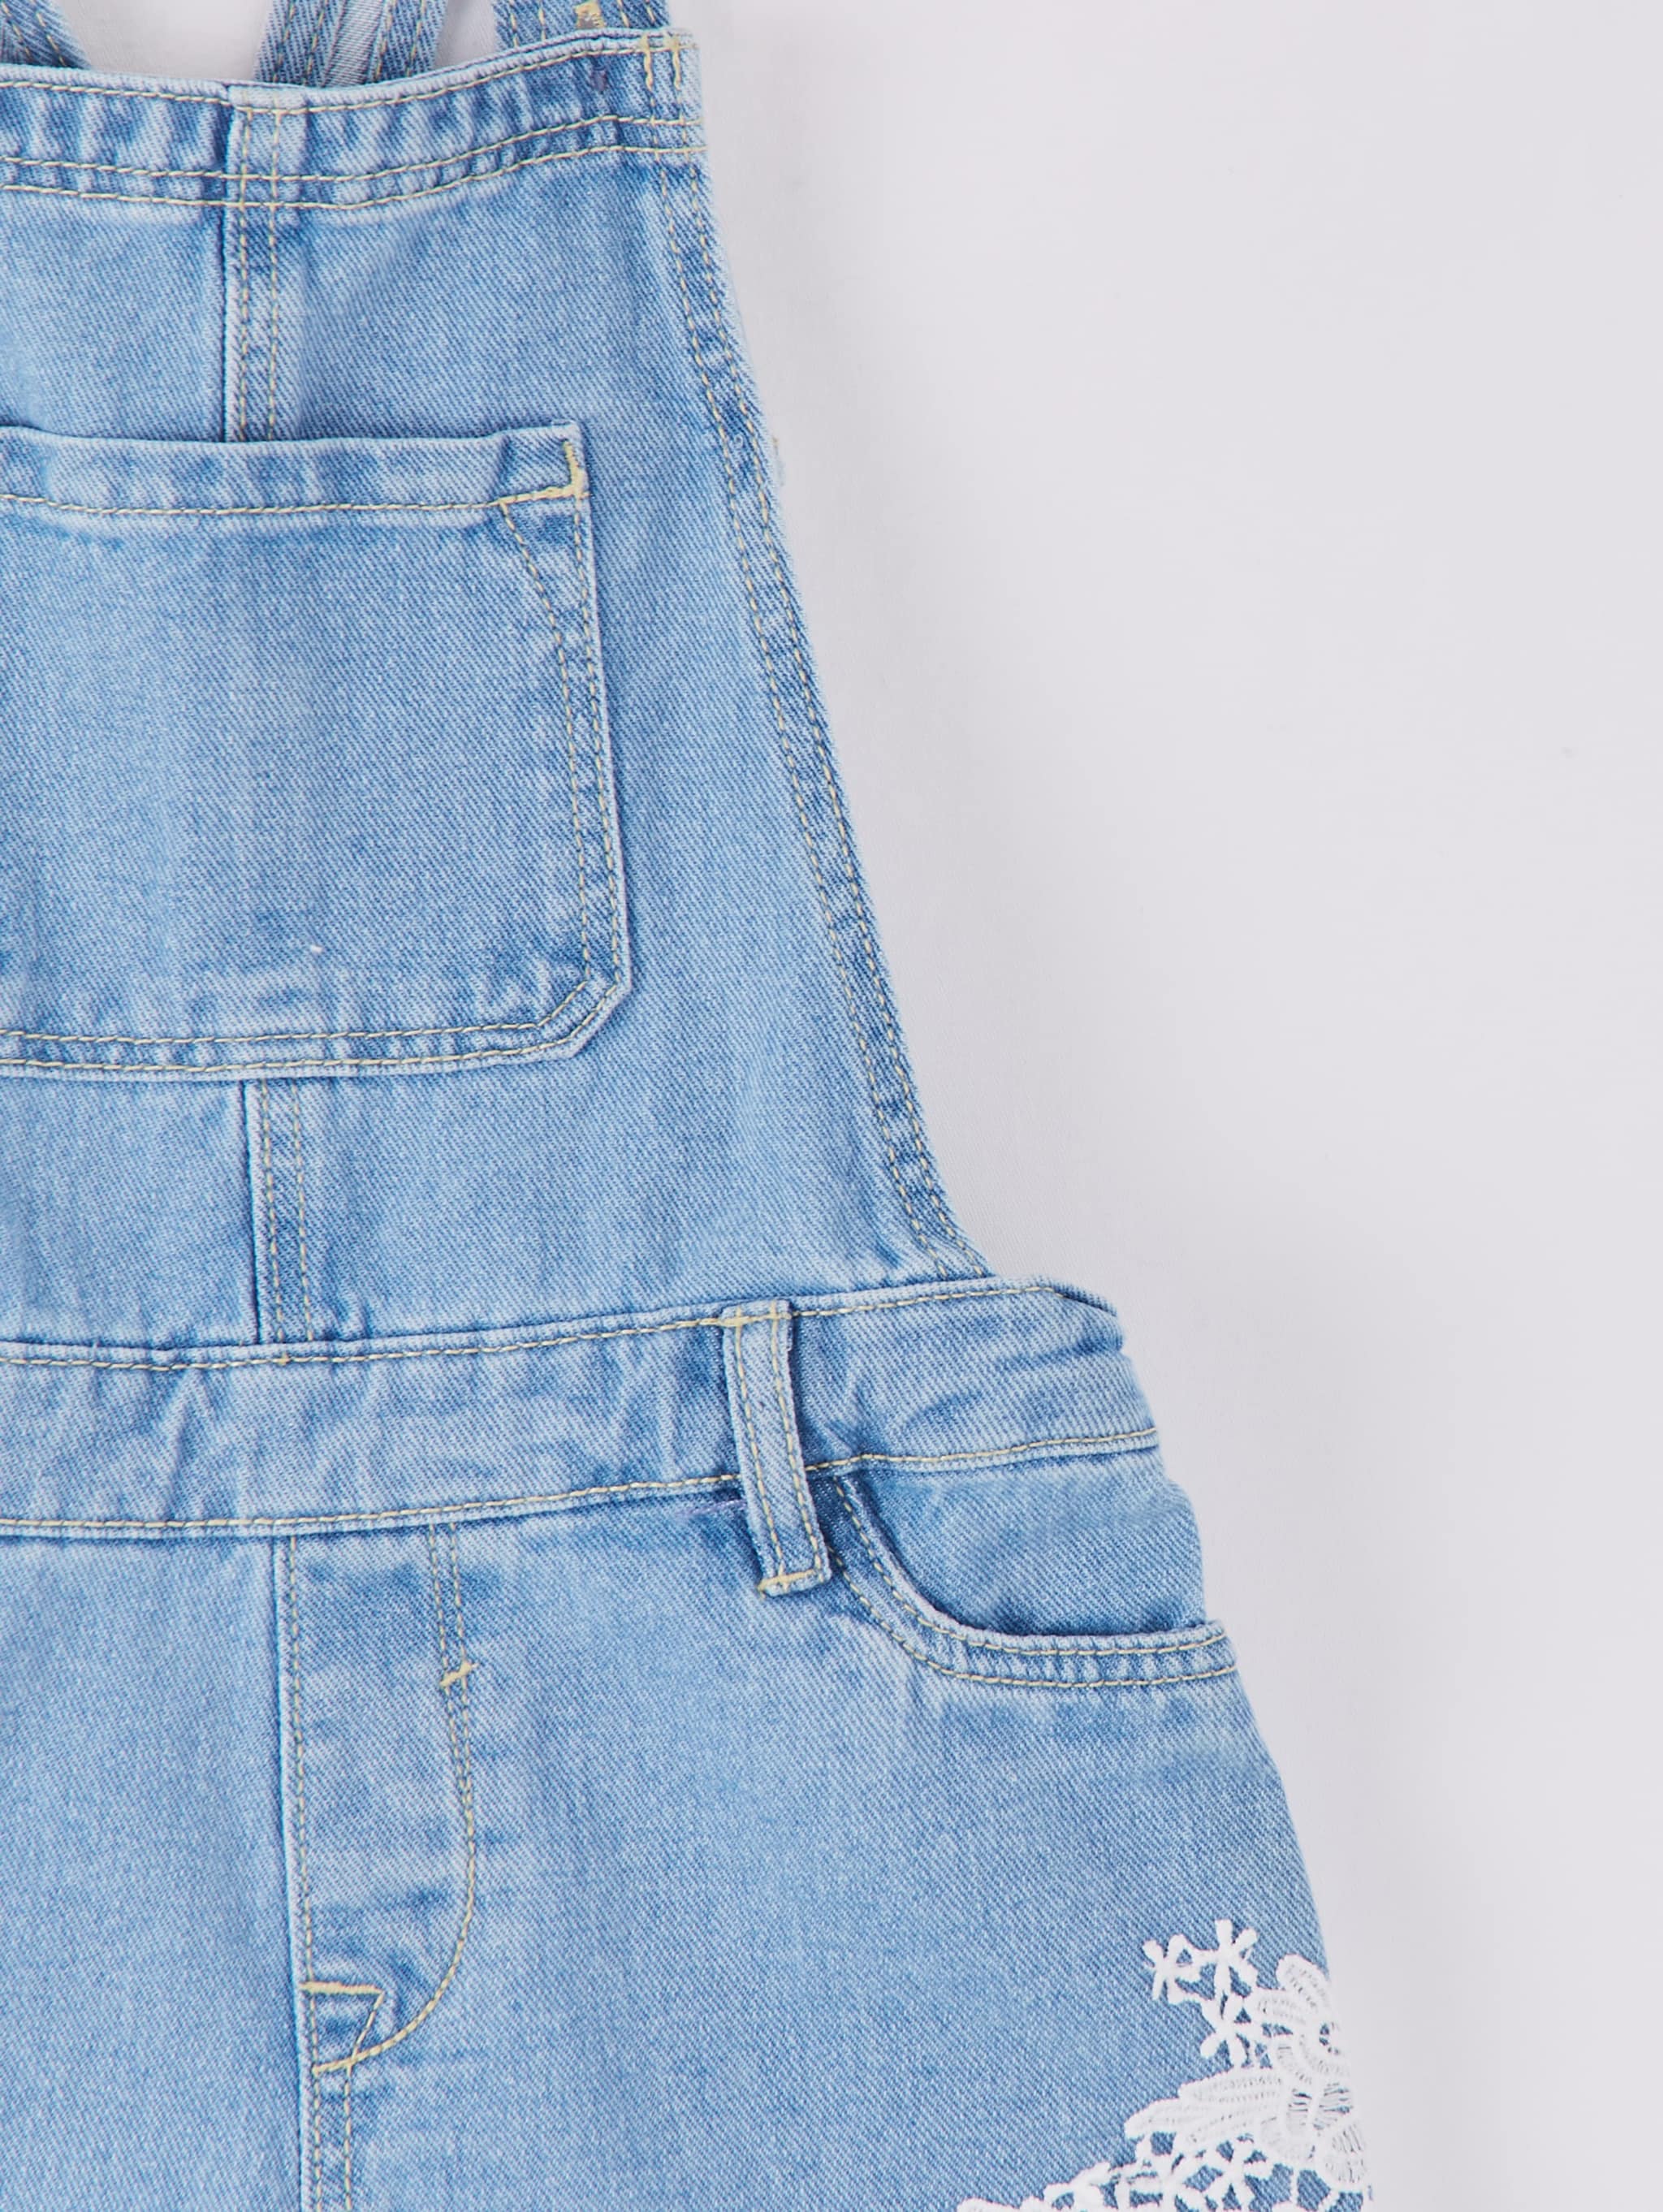 dungaree jeans online